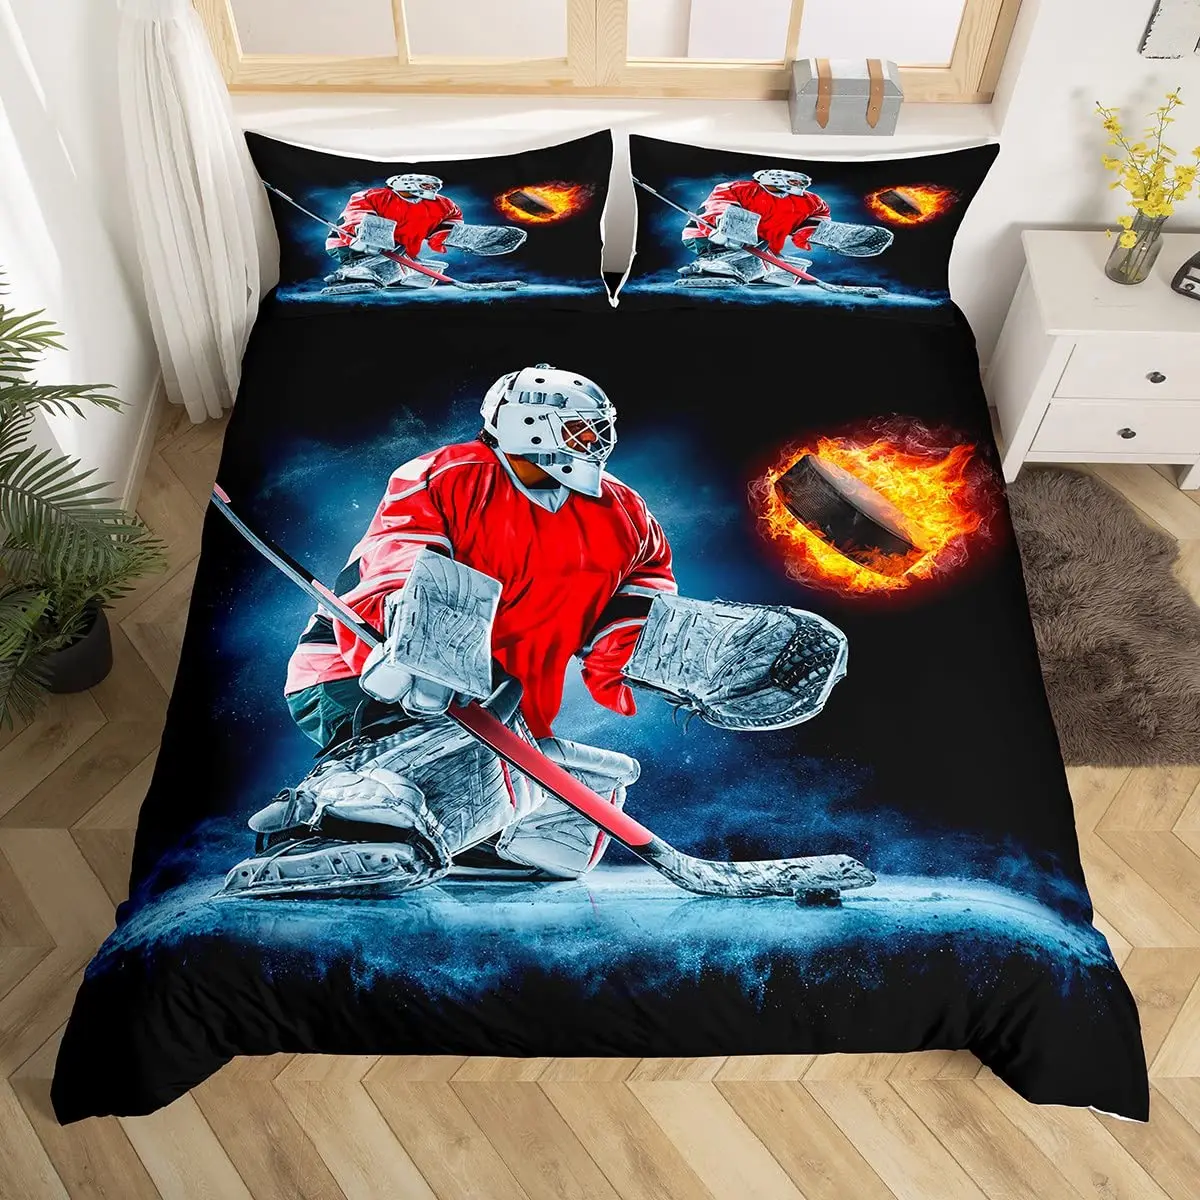 Hockey Duvet Cover Set 2/3pcs Ice Hockey Sports Comforter Cover Burning Hockey Puck Ball Queen Size Quilt Cover for Kids Boys